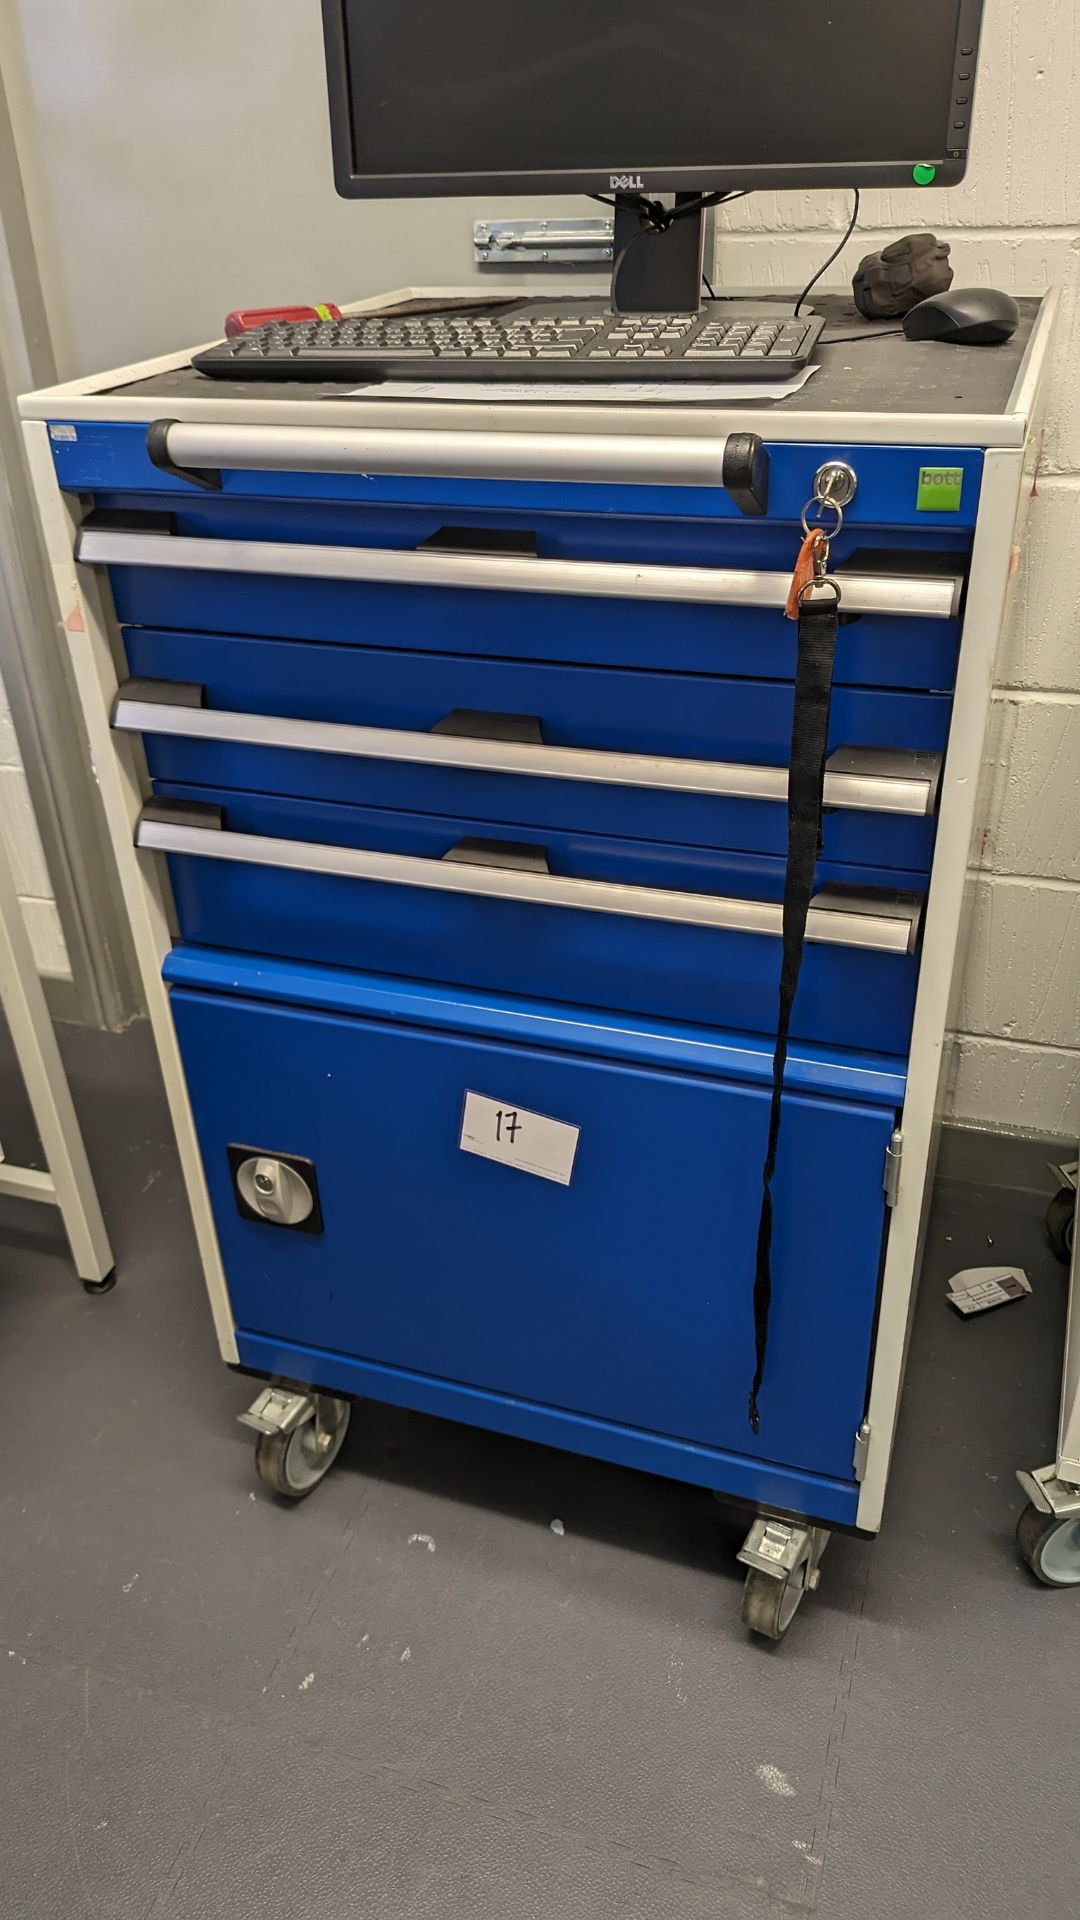 Portable Steel Storage Cabinet as lotted